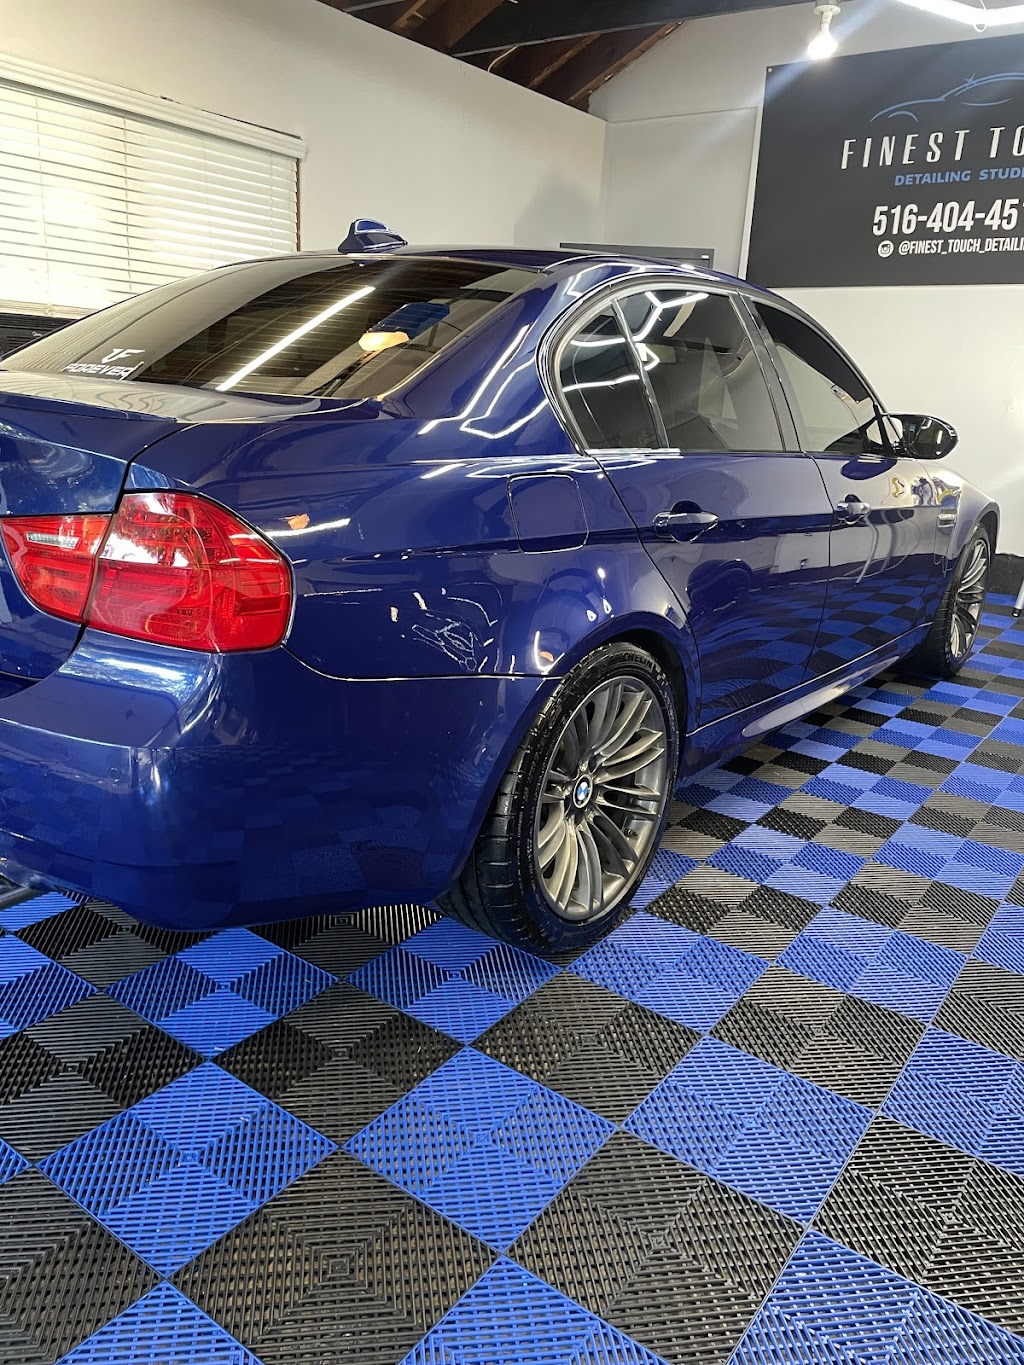 Finest Touch Detailing Studio | 1 Indian Head Rd, Commack, NY 11725 | Phone: (516) 404-4510